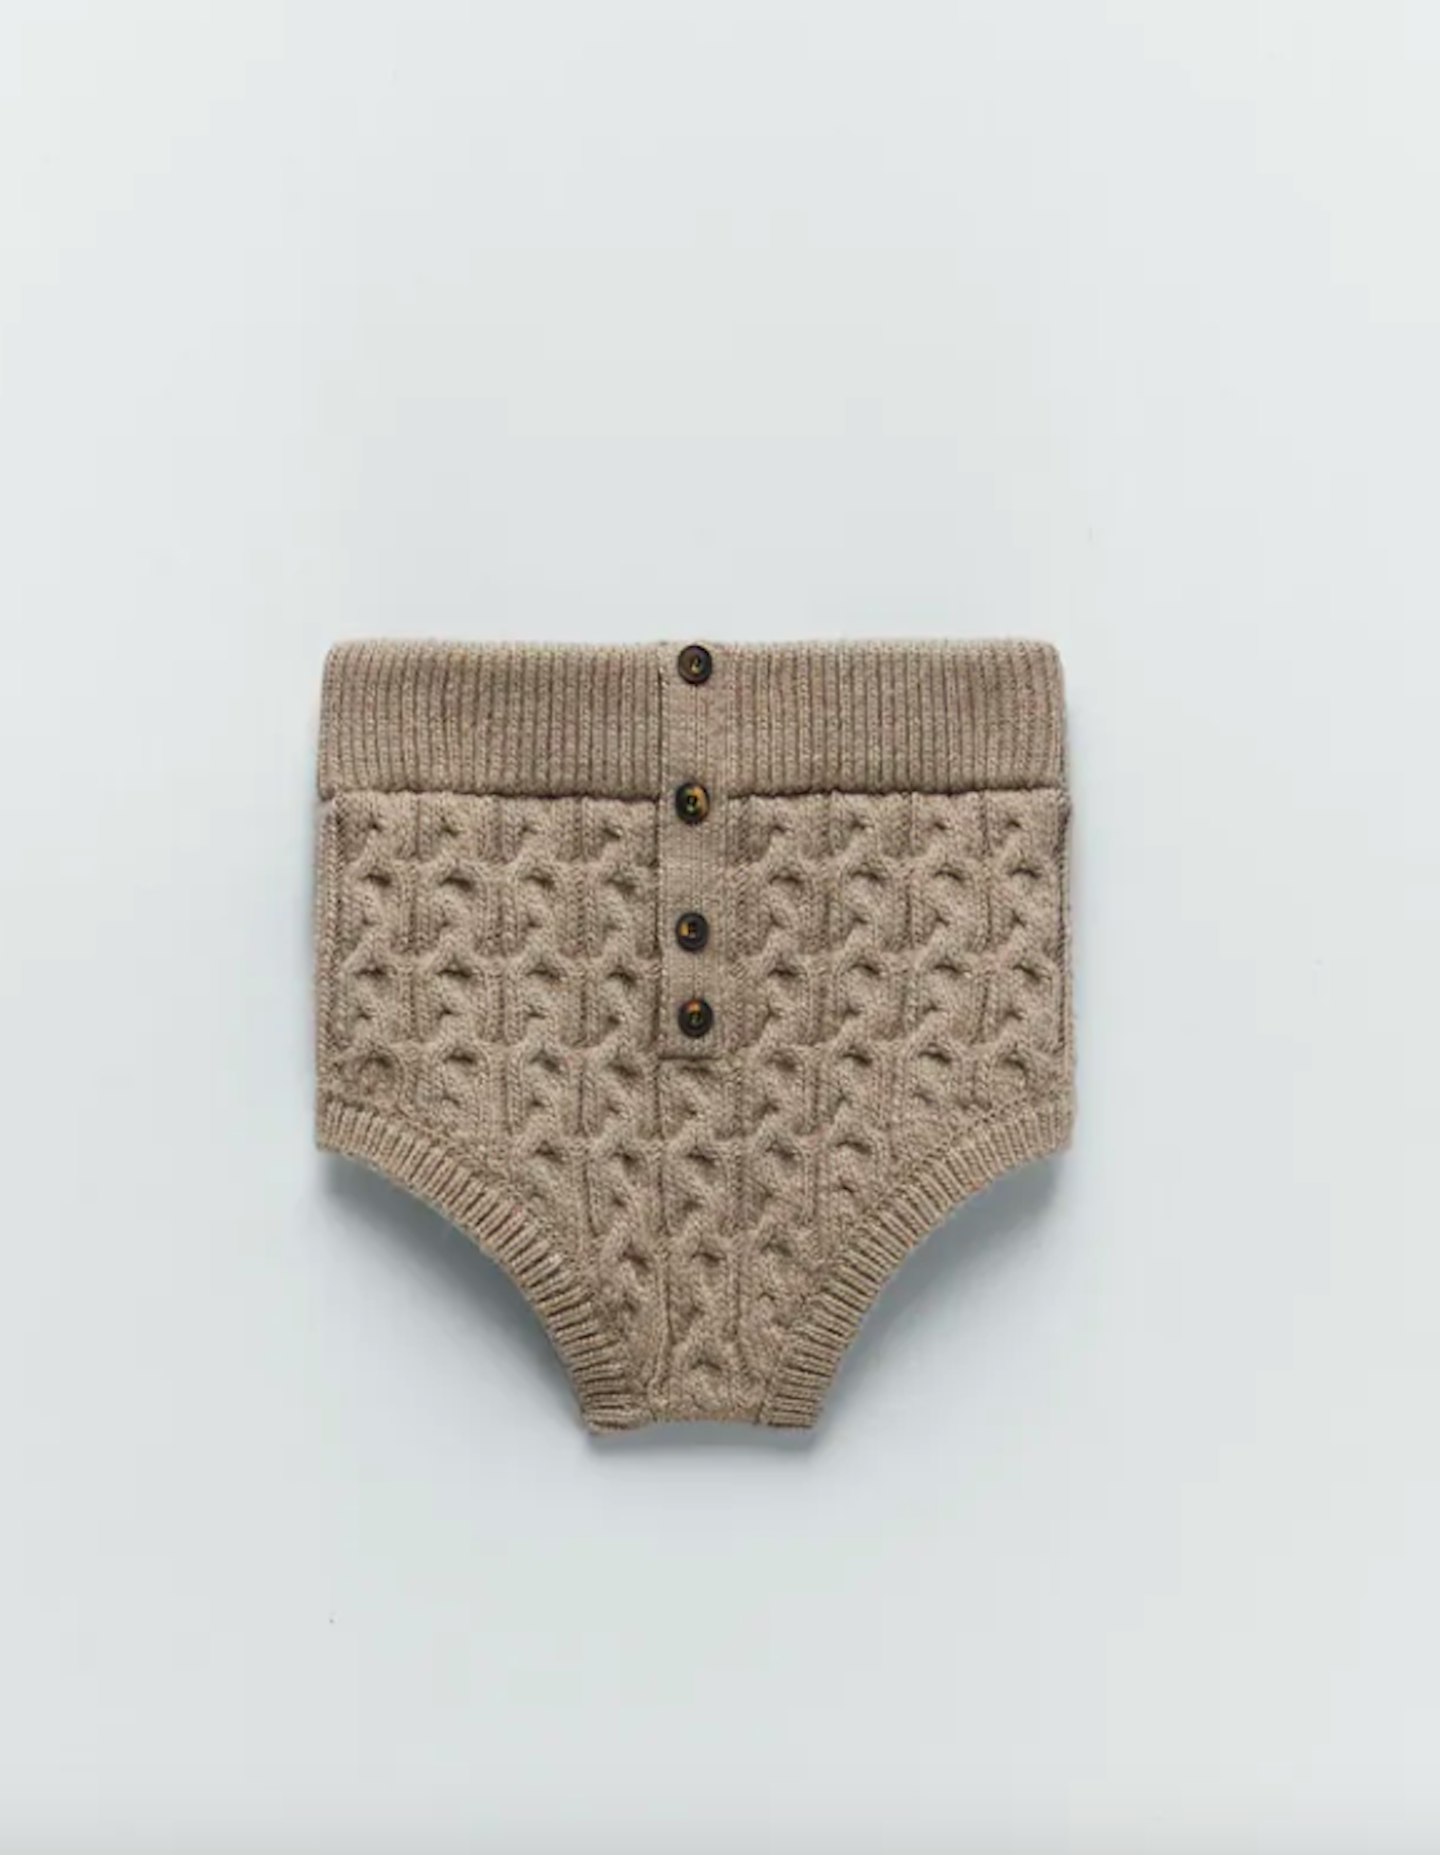 Zara, Cable-Knit Briefs, £19.99